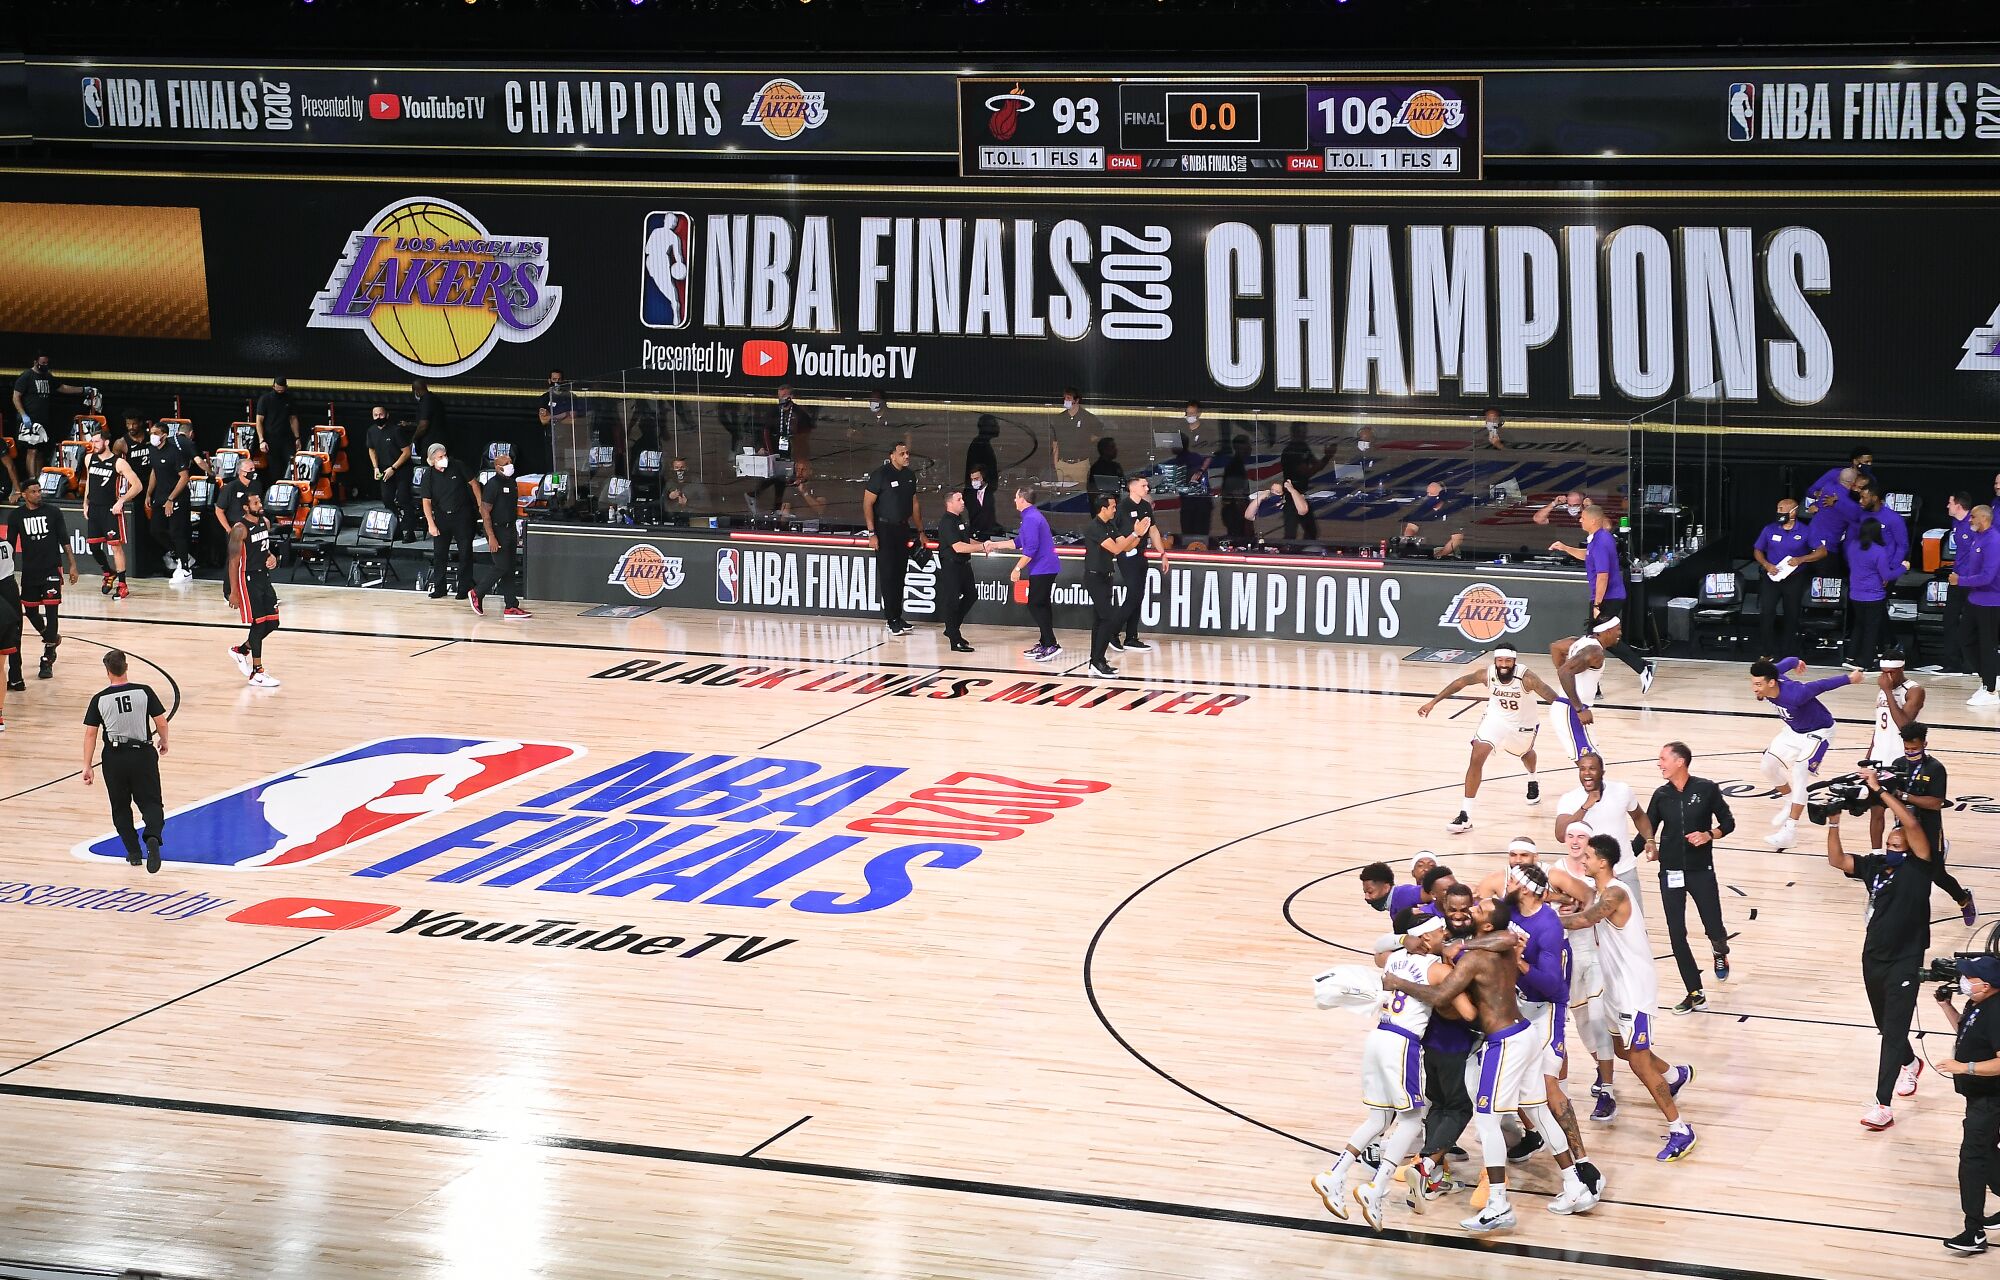 The Lakers celebrate after defeating the Miami Heat to win the NBA championship on Oct. 11.